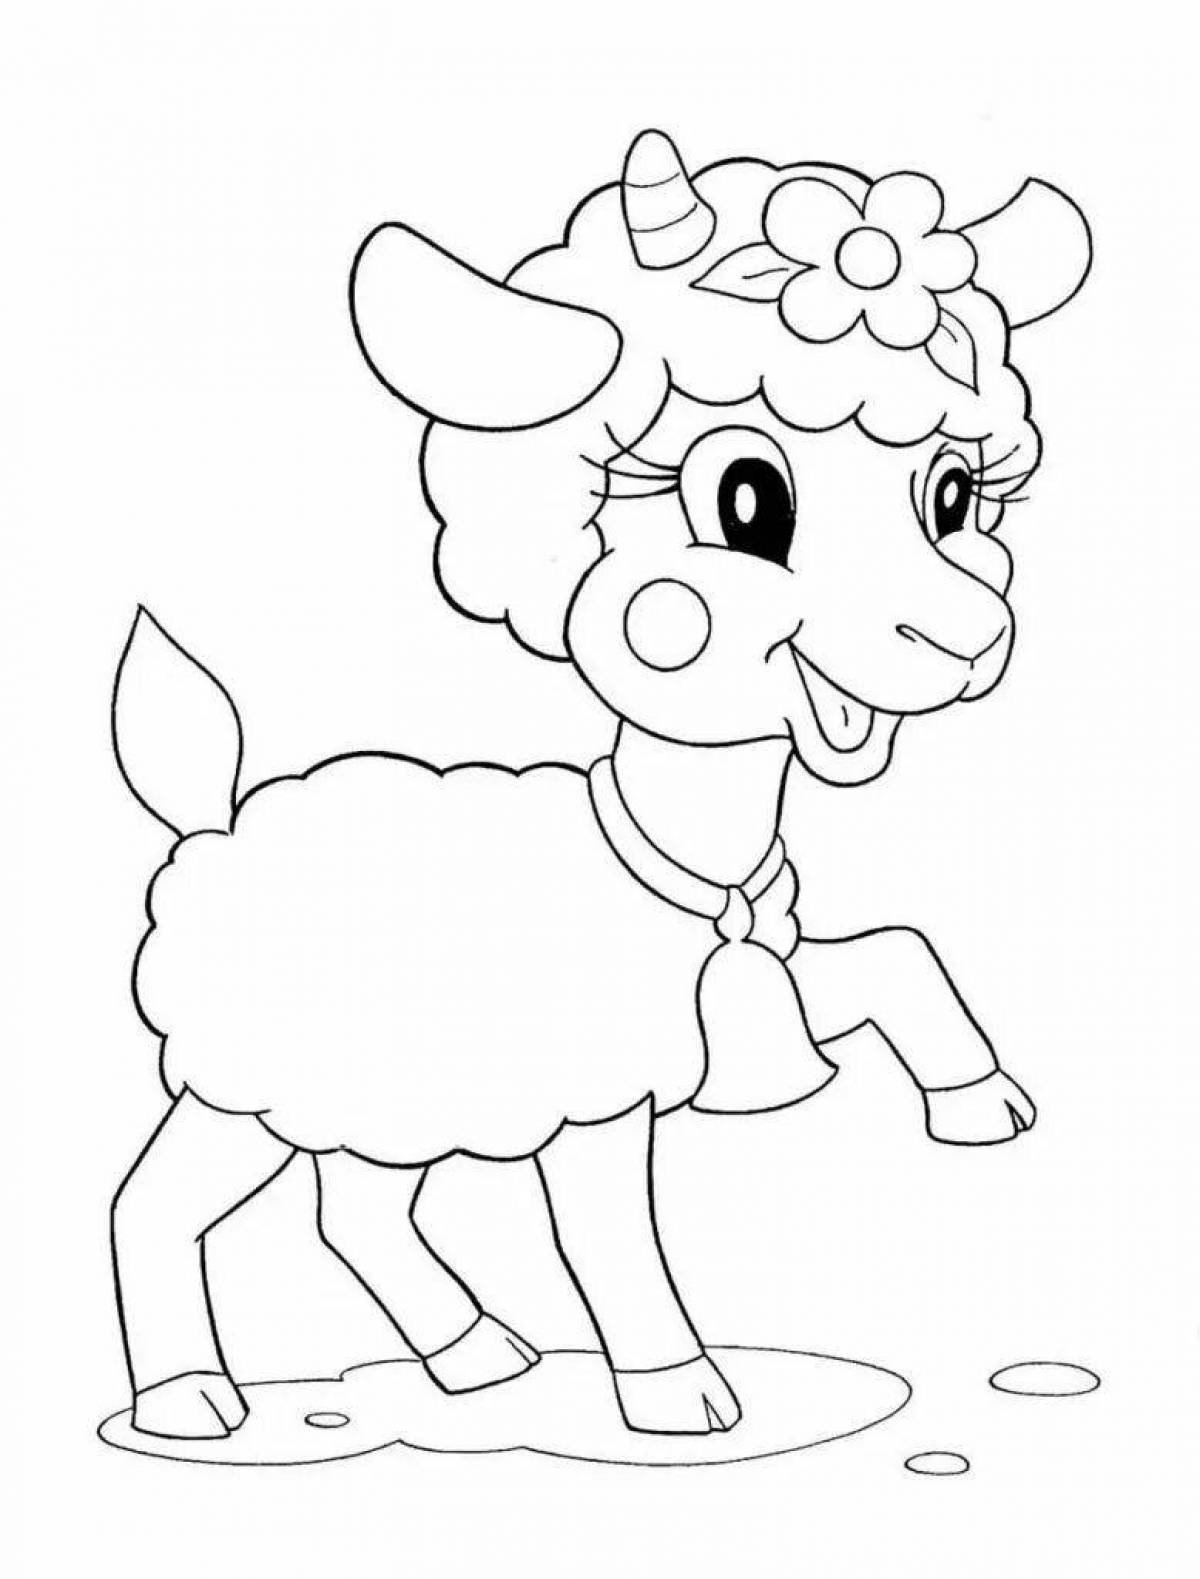 Funny goat coloring book for 5-6 year olds